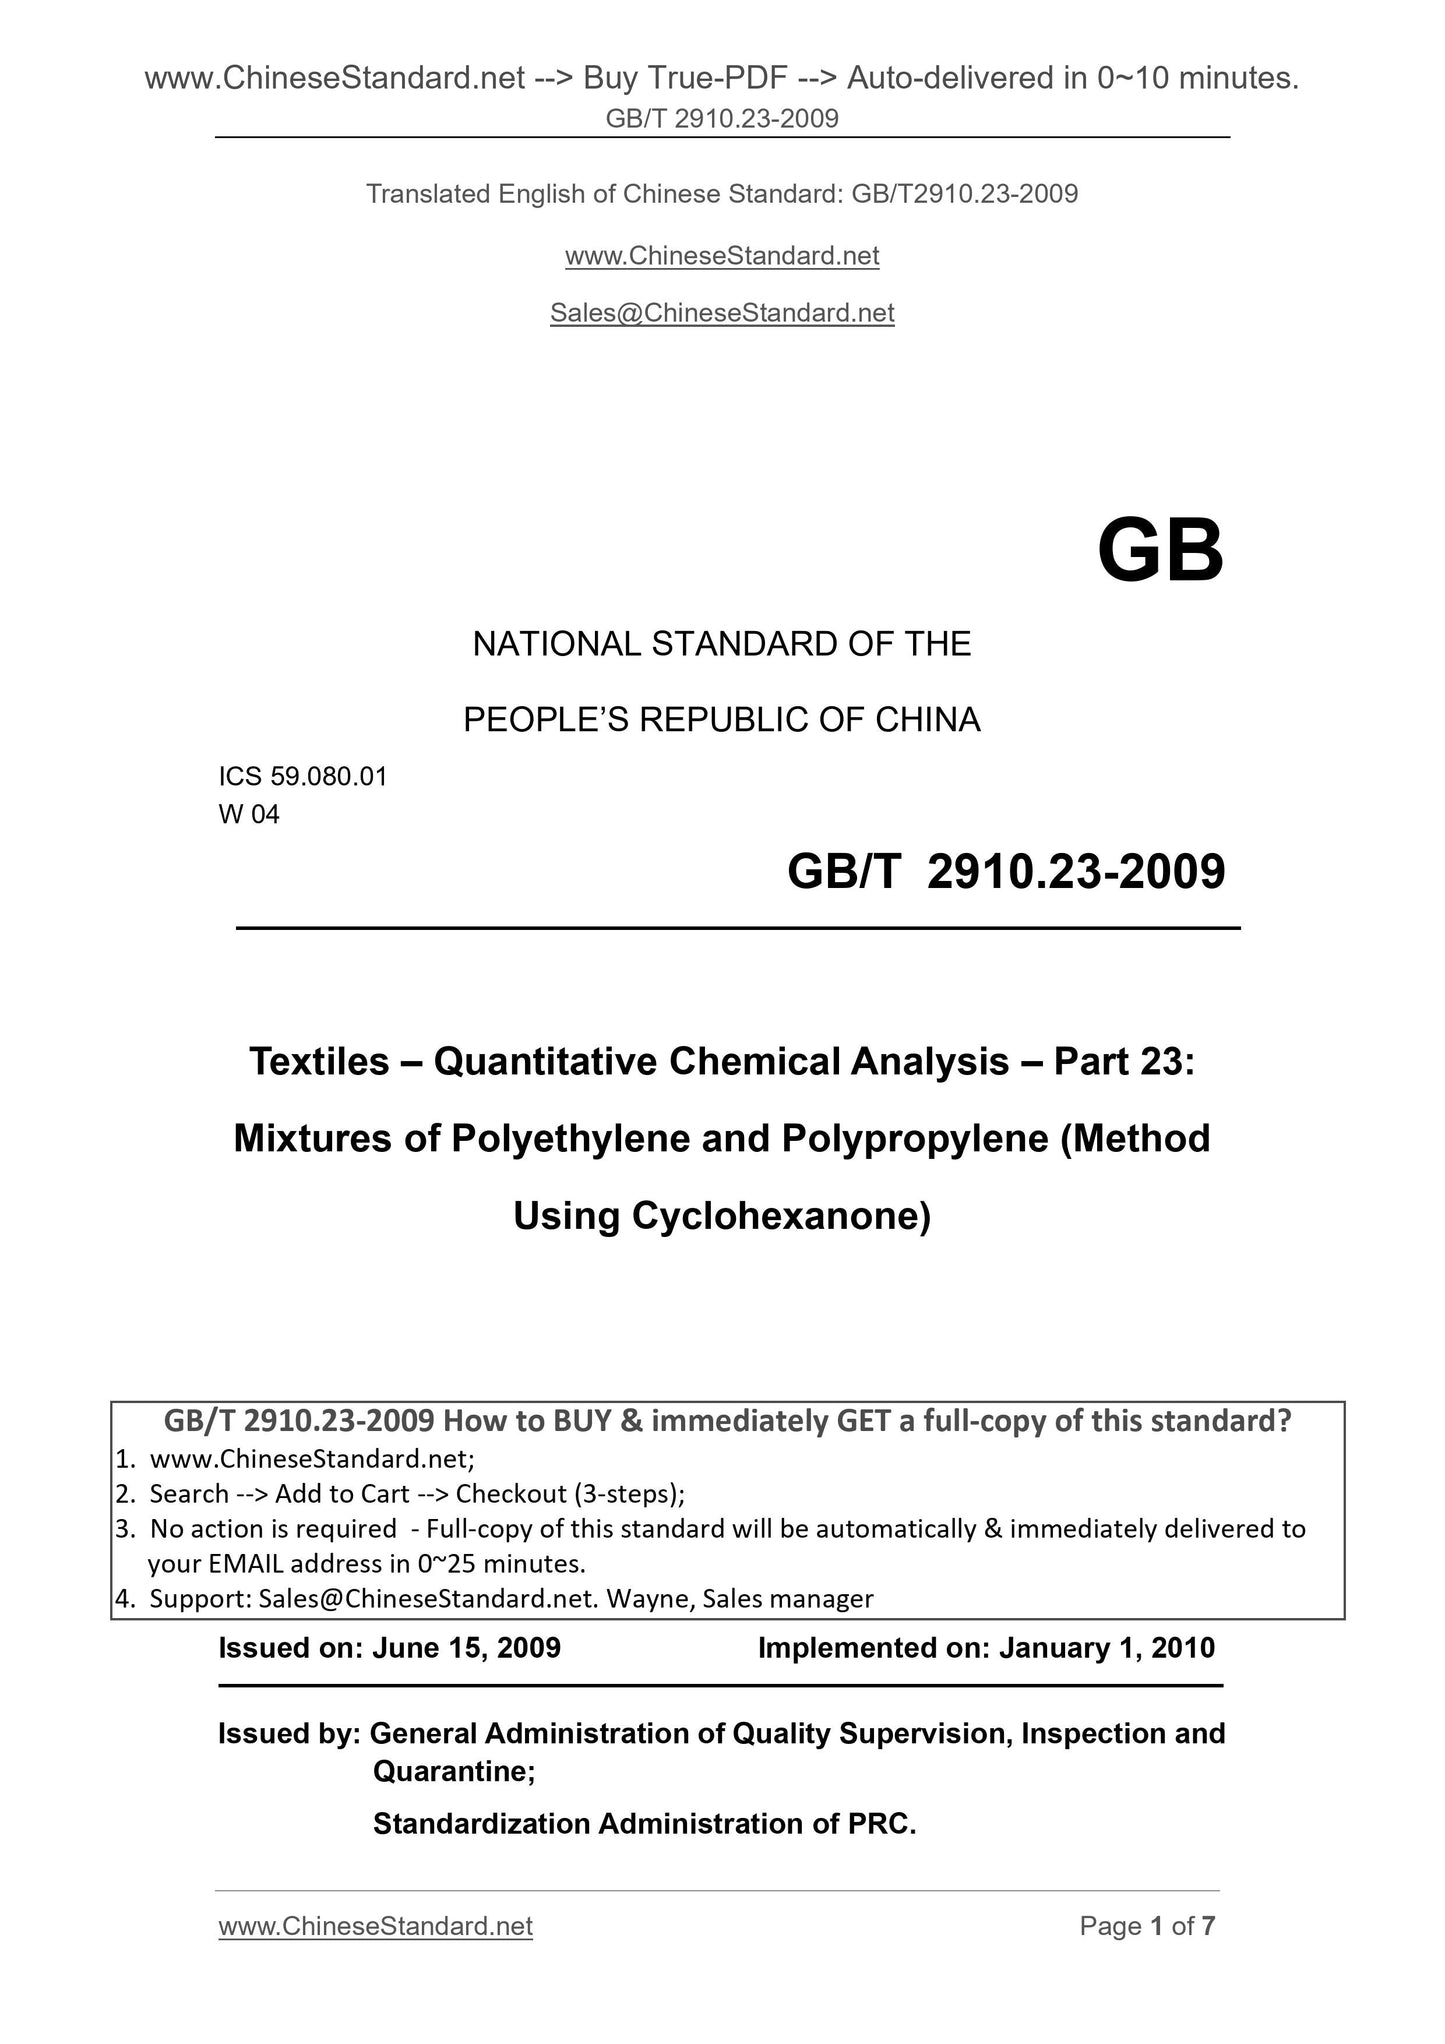 GB/T 2910.23-2009 Page 1